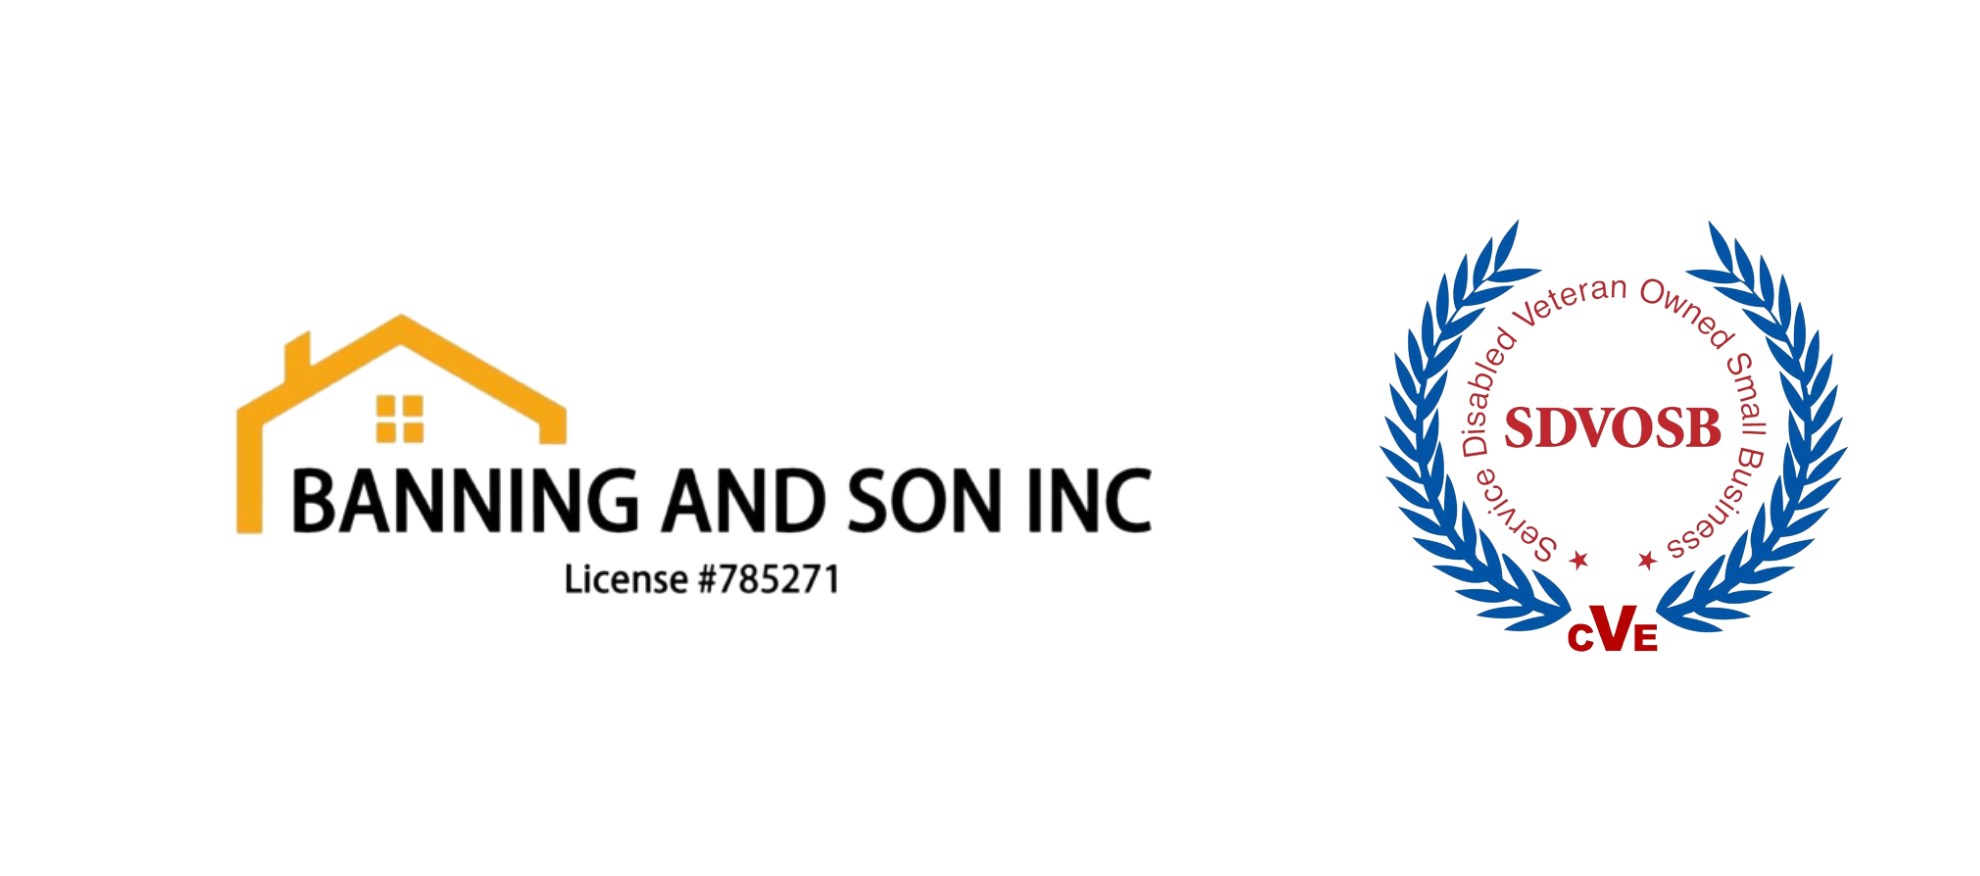 Banning and Son Logo with SDVOSB Logo.